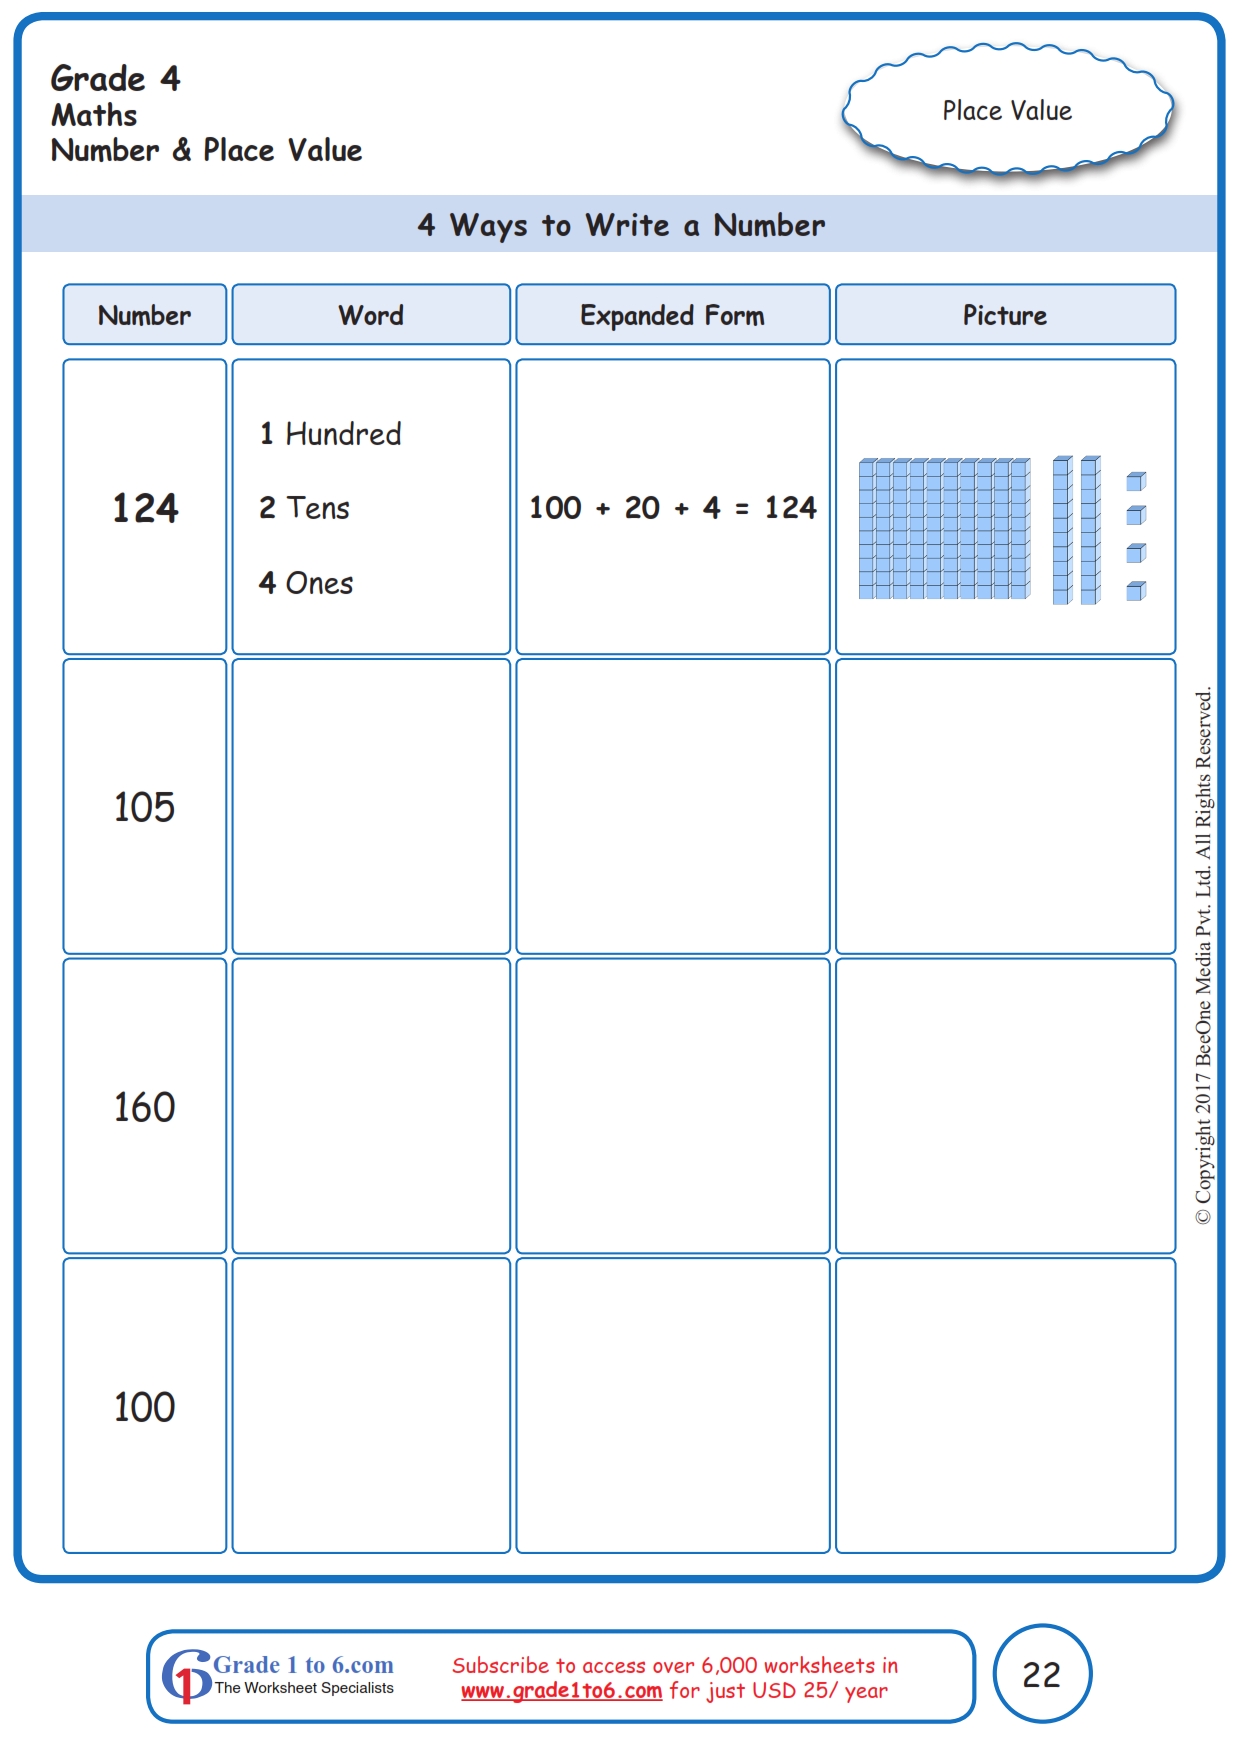 4 Ways To Write A Number Worksheets www grade1to6